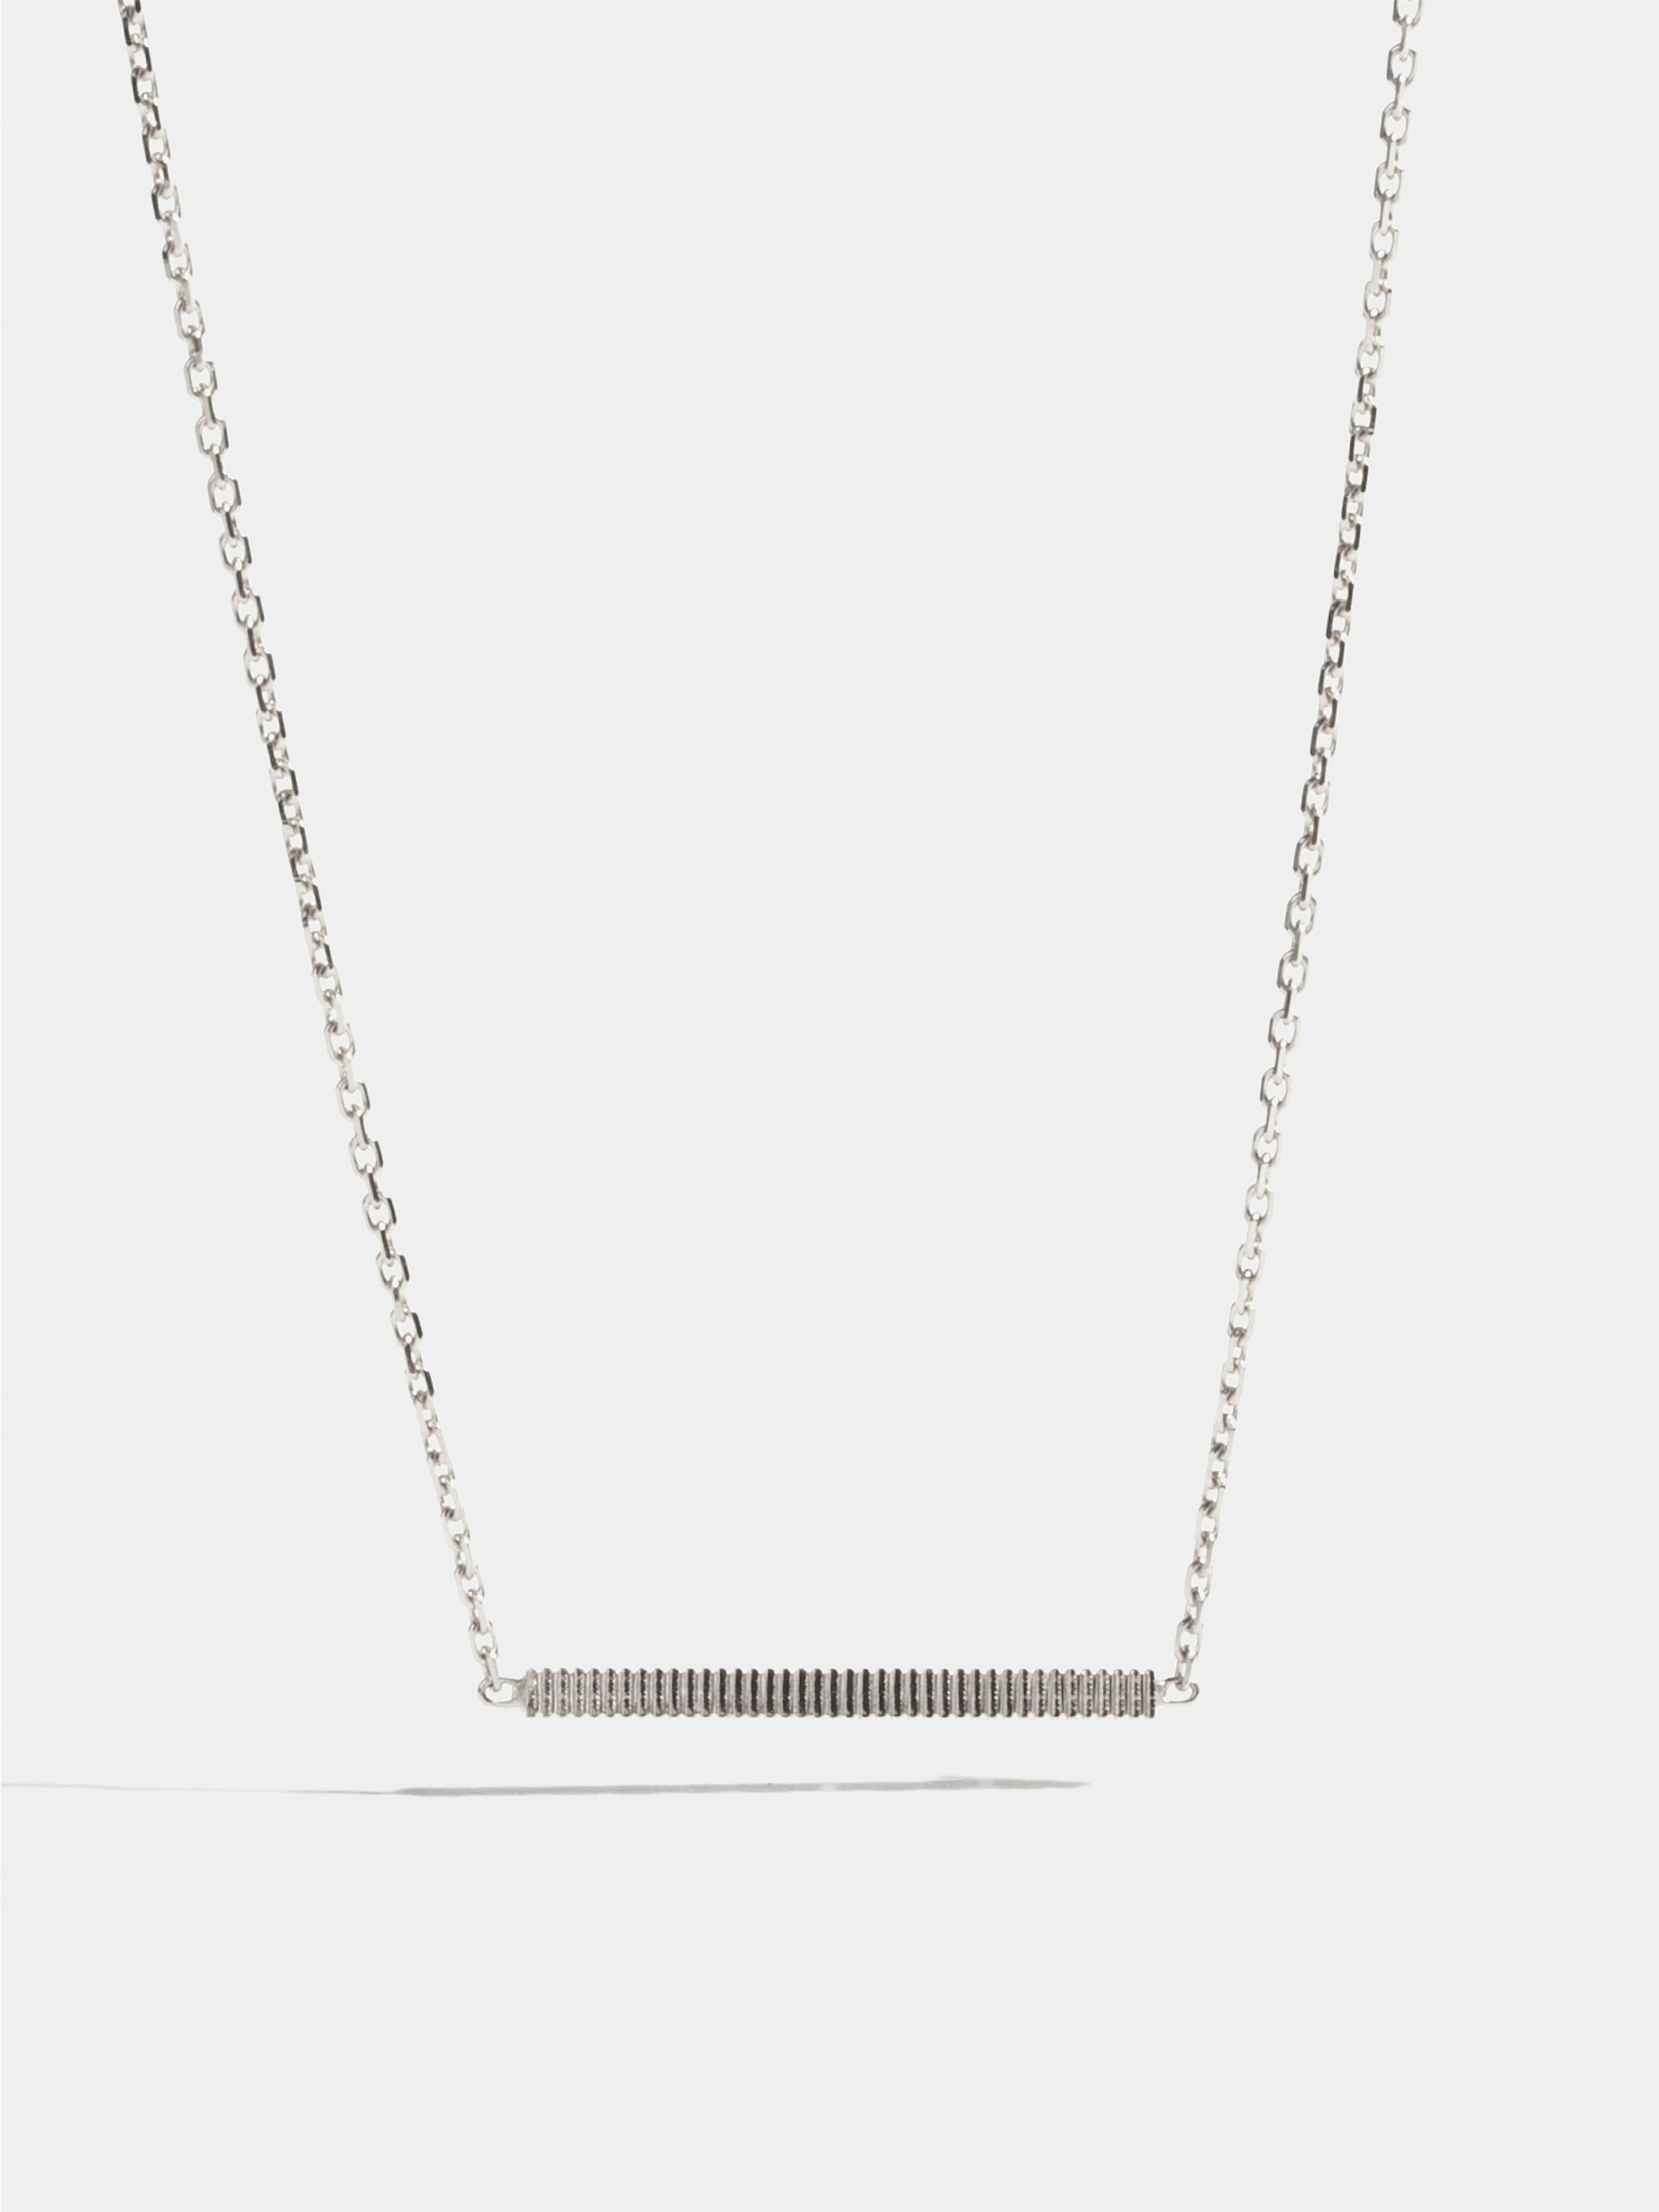 Motif Anagramme ridges in white gold 18k Fairmined ethical, on 42 cm chain